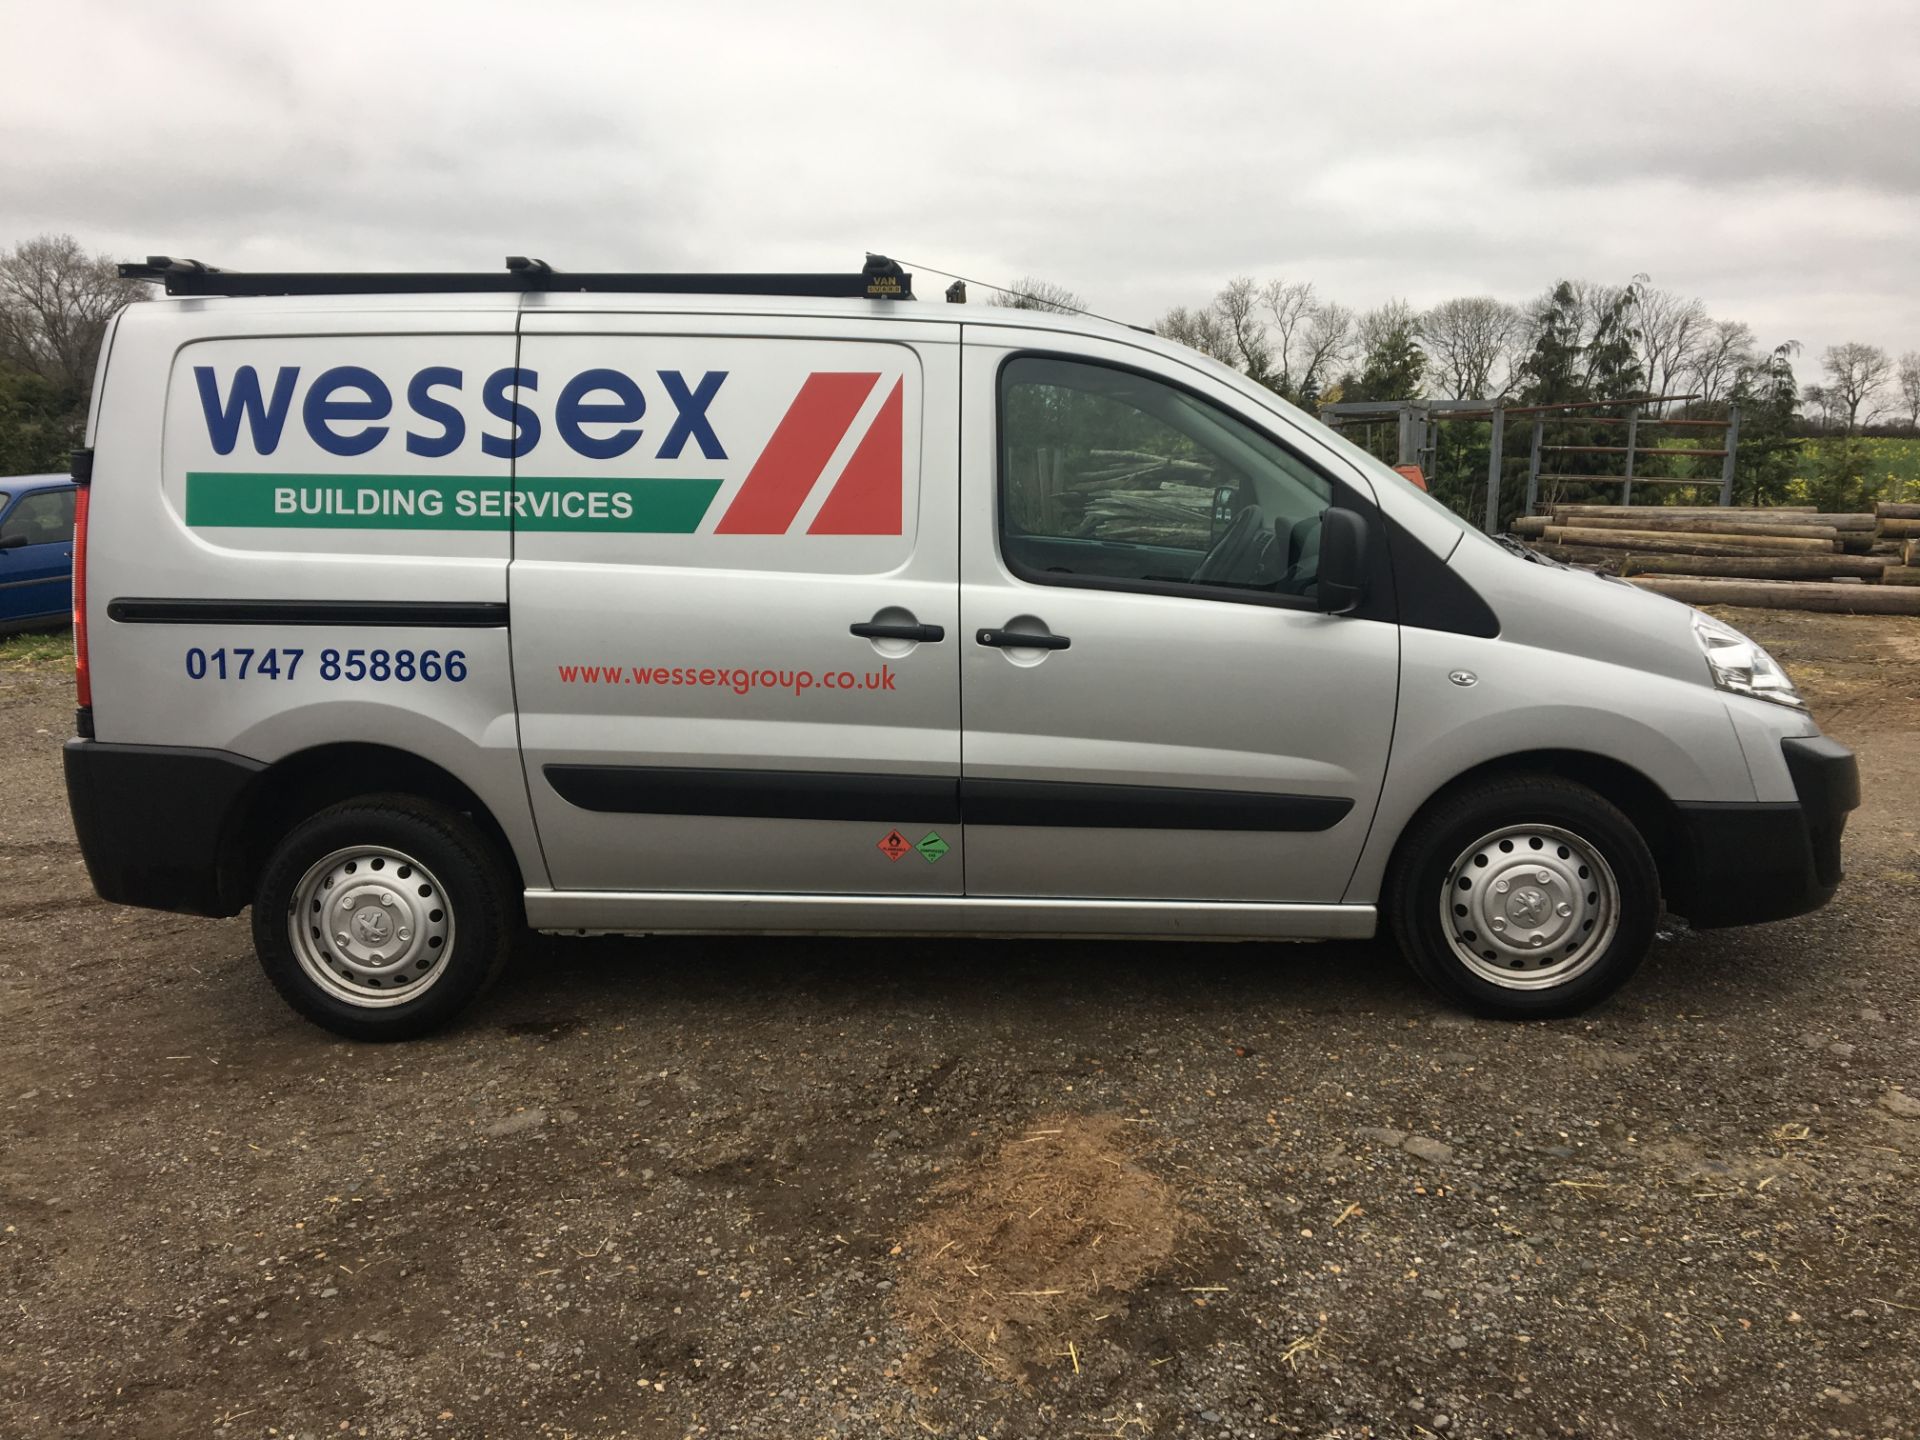 PEUGEOT EXPERT 1000 L1H1 Professional HDI signwritten panel van, with roof rails, Registration No... - Image 2 of 9